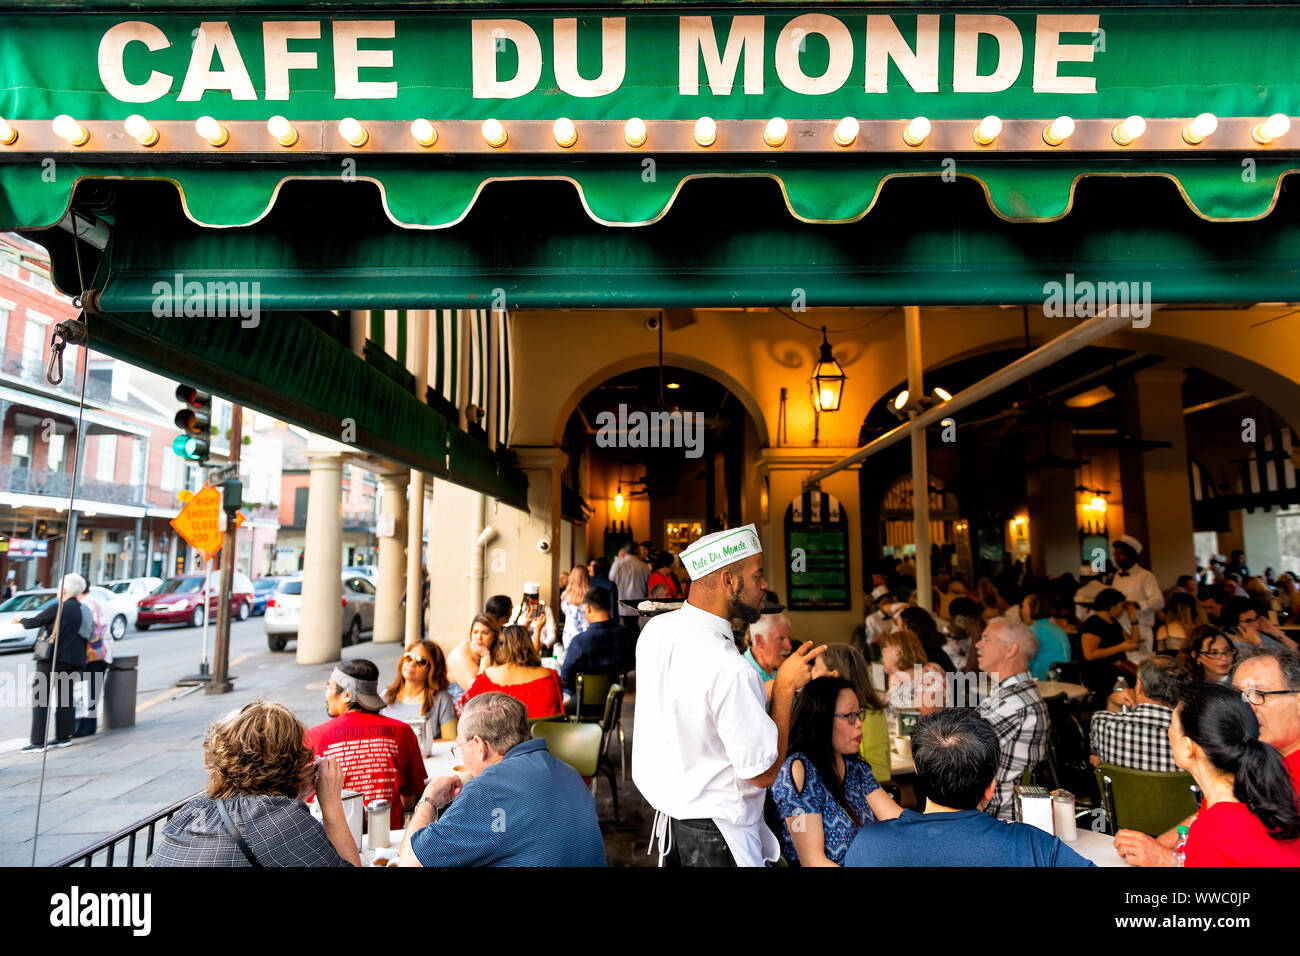 New Orleans, USA - April 22, 2018: People ordering food in Cafe Du Monde restaurant, eating beignet powdered sugar donuts, drinking chicory coffee, wa Stock Photo